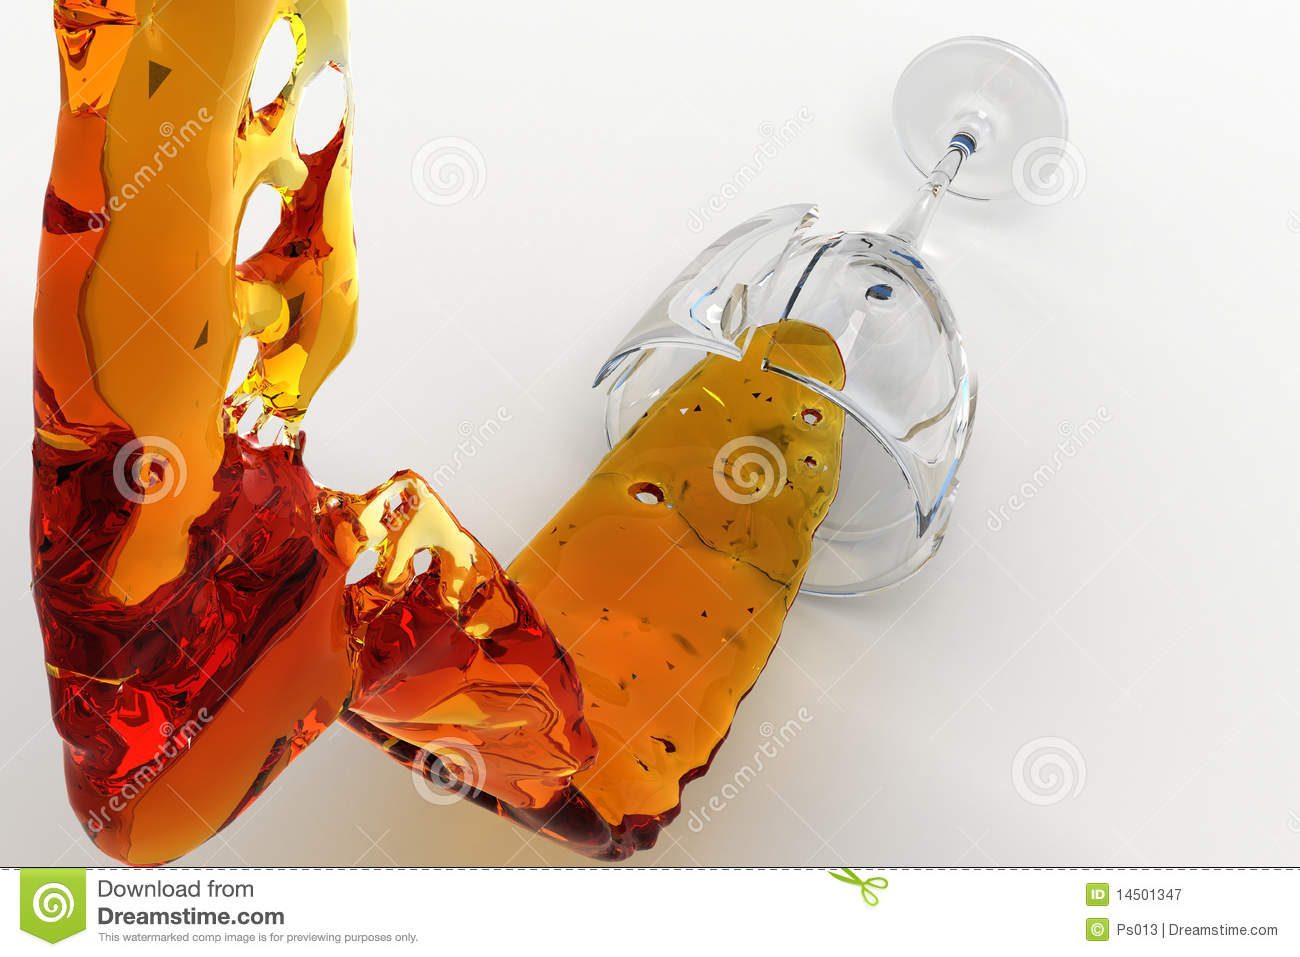 The Spread Drink From The Broken Glass Royalty Free Stock Photography